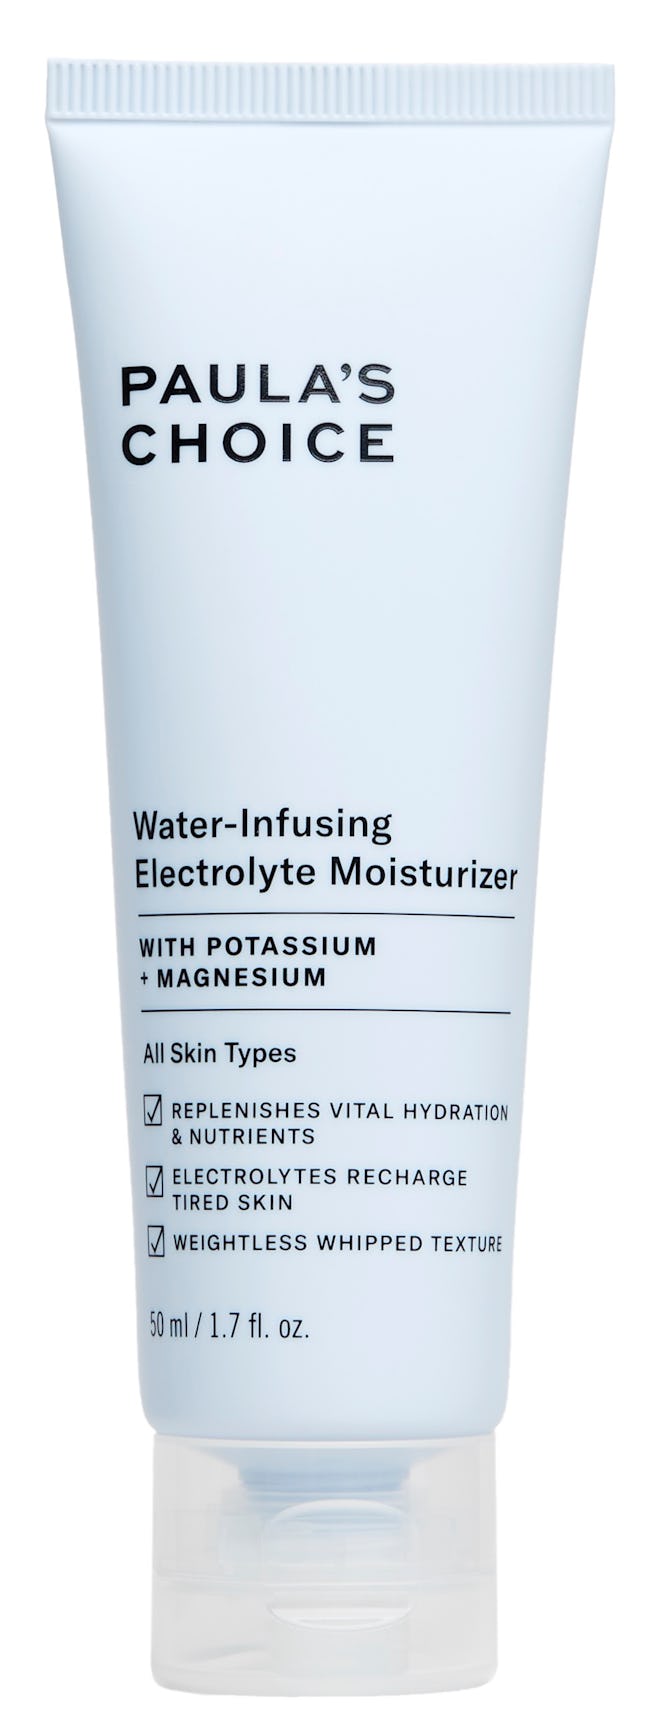 Water-Infused Electrolyte Moisturizer 